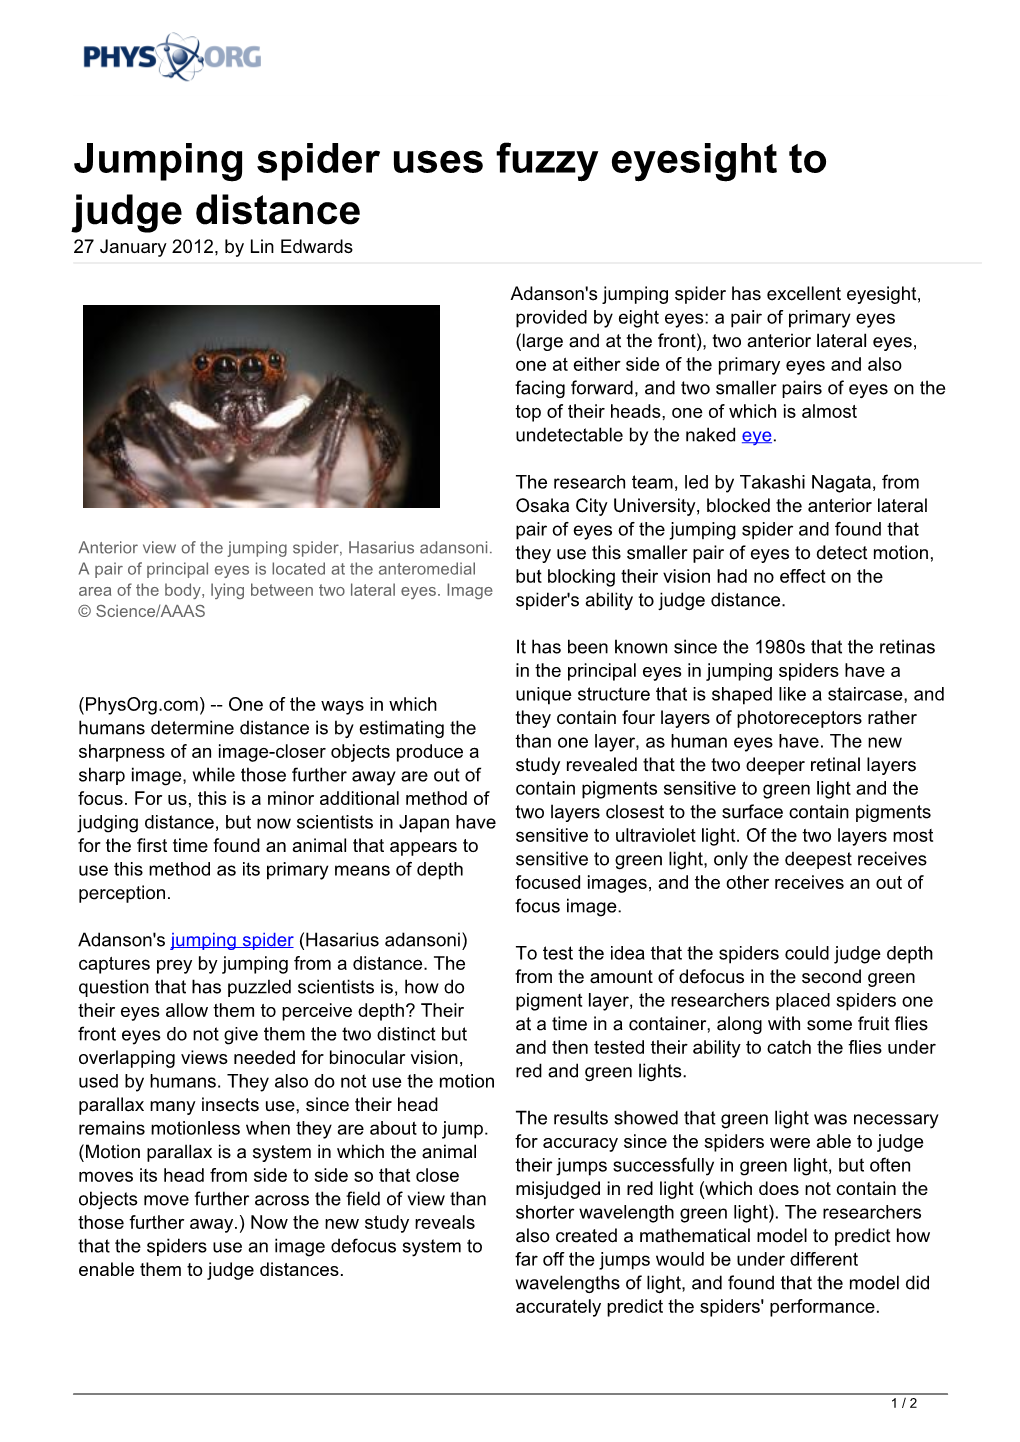 Jumping Spider Uses Fuzzy Eyesight to Judge Distance 27 January 2012, by Lin Edwards